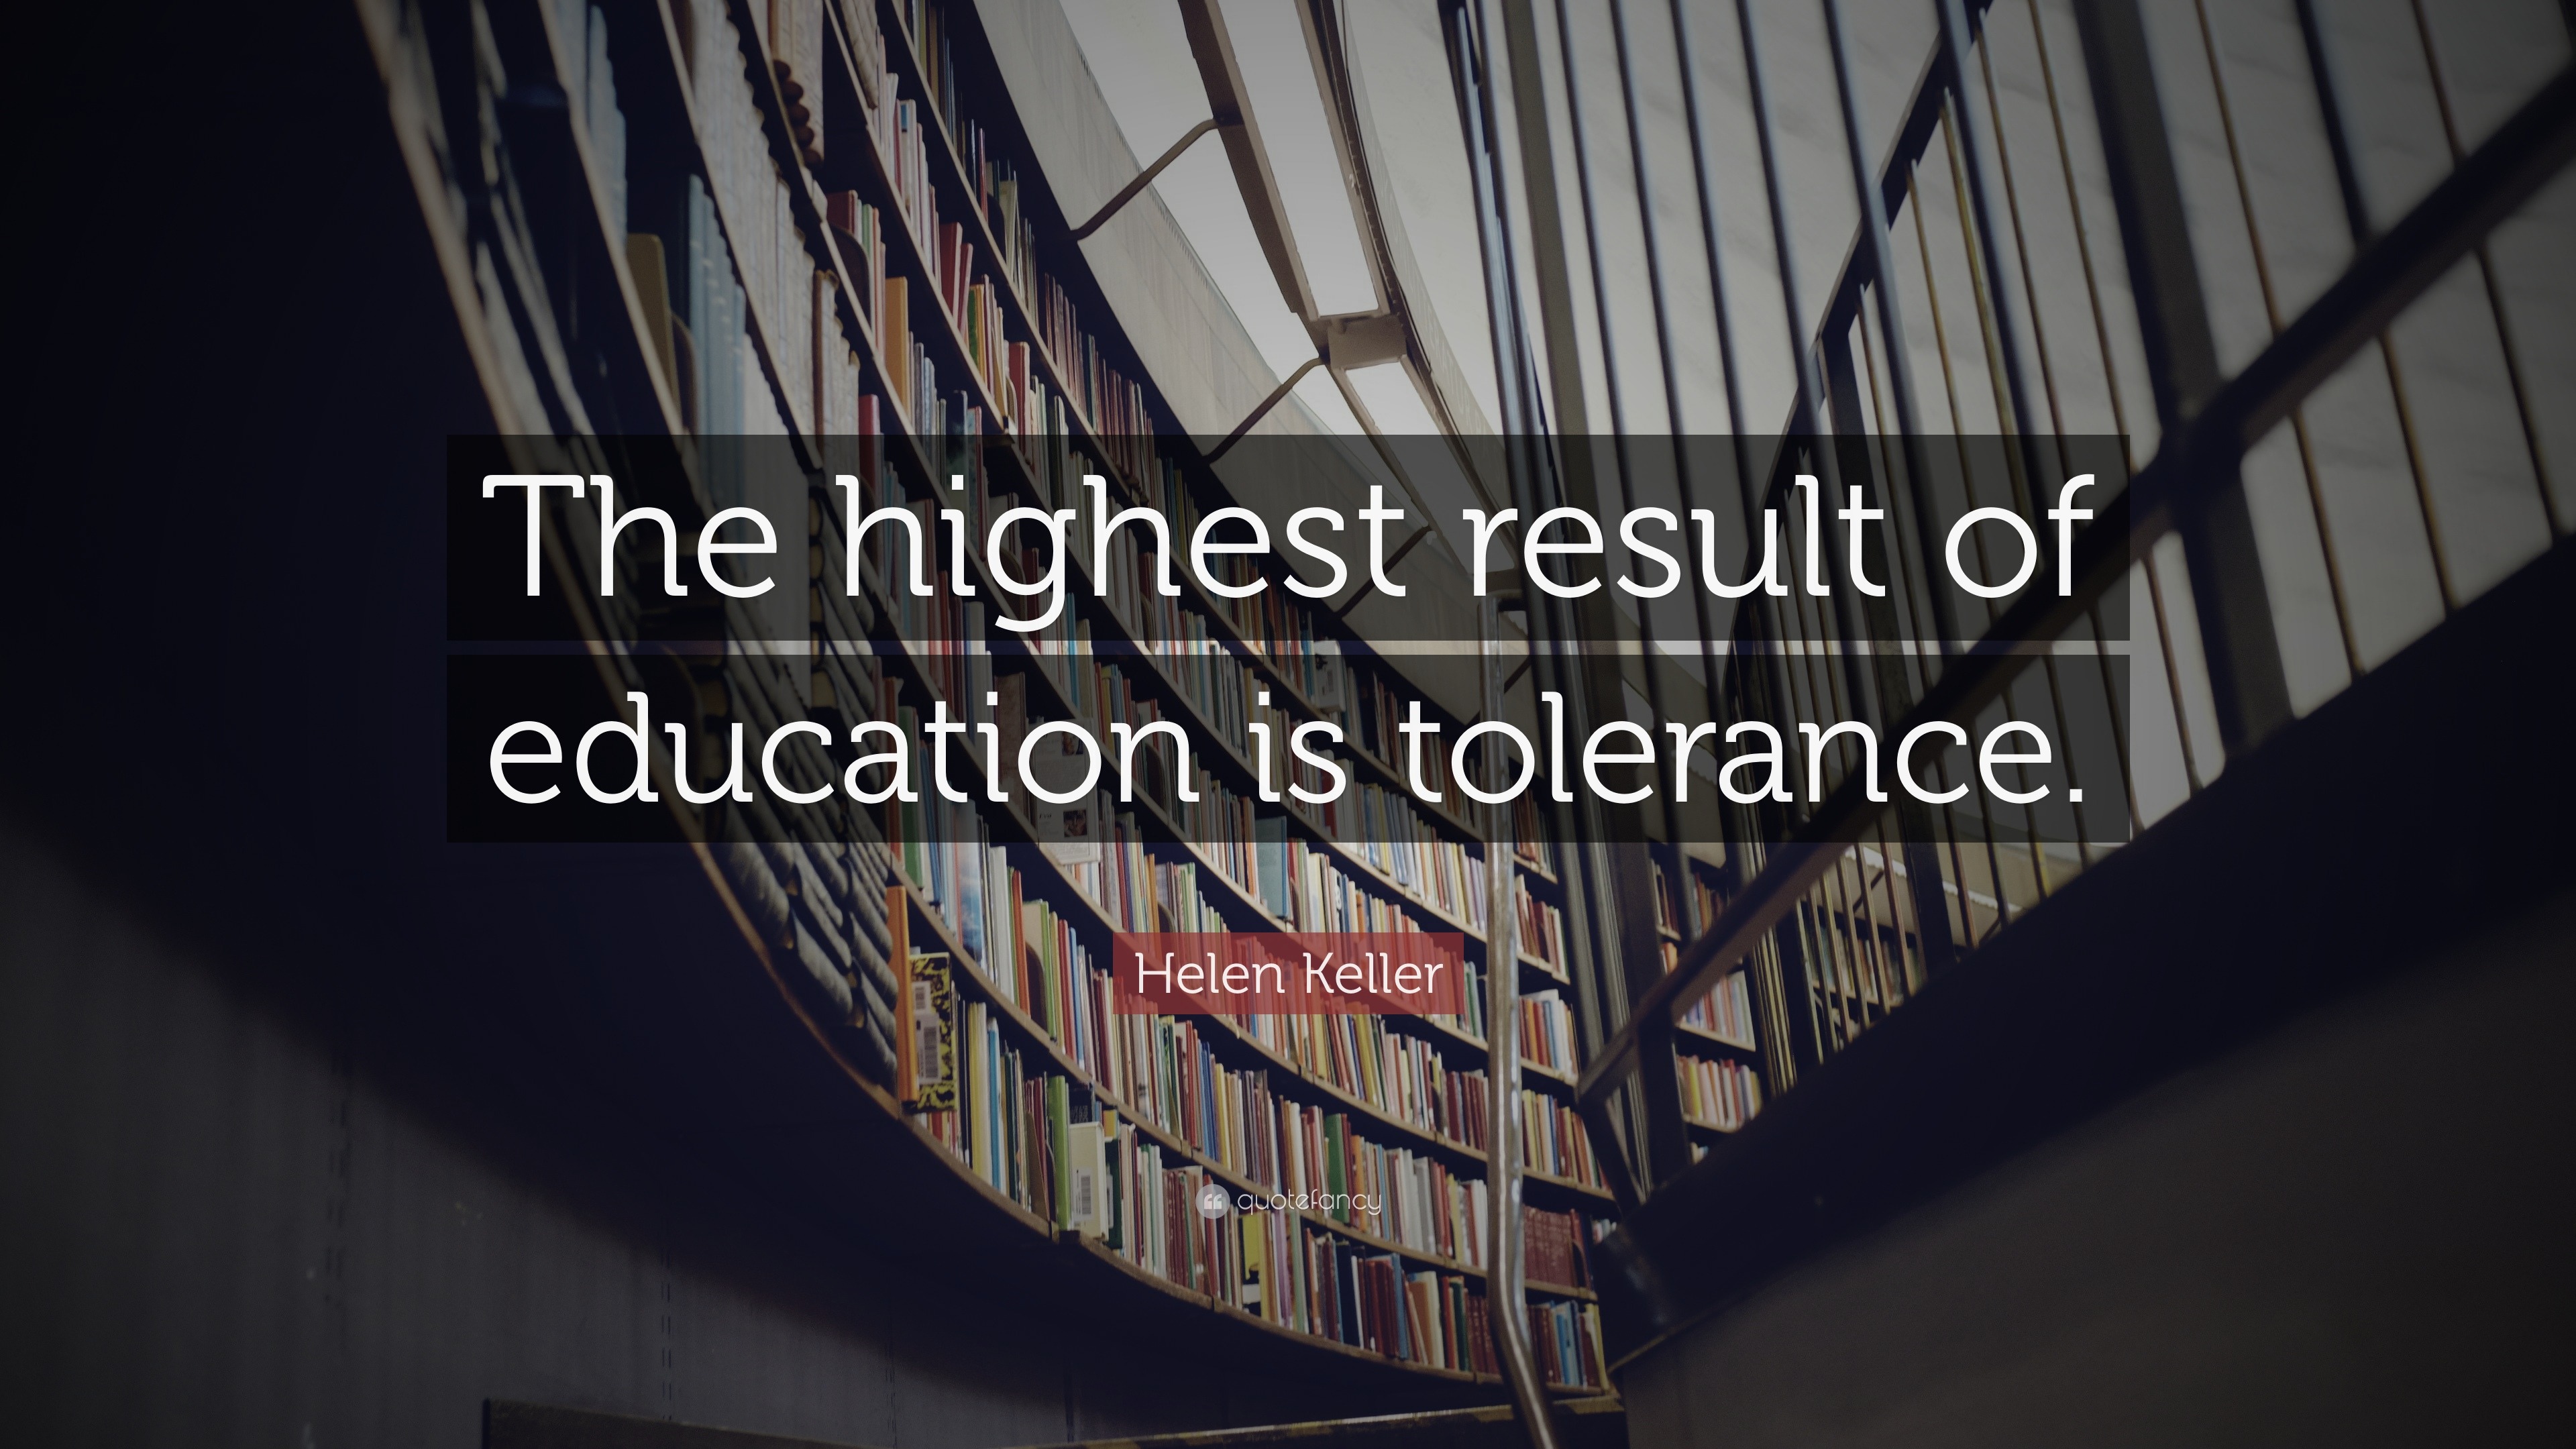 Helen Keller Quote: “The highest result of education is tolerance.” (12